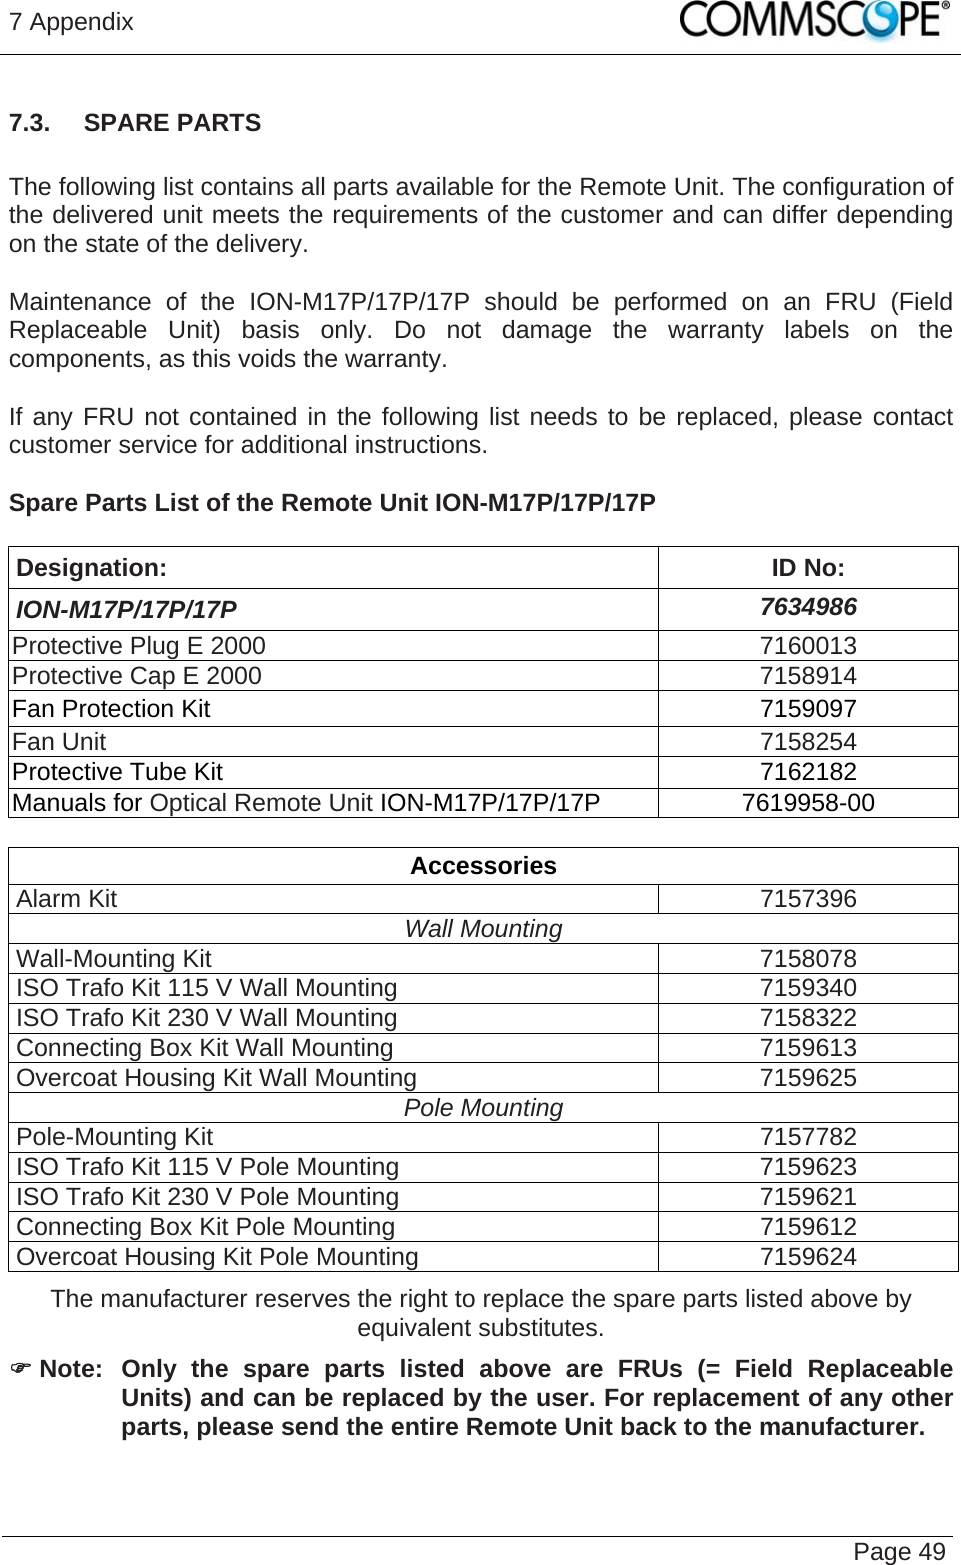 7 Appendix   Page 49 7.3.  SPARE PARTS  The following list contains all parts available for the Remote Unit. The configuration of the delivered unit meets the requirements of the customer and can differ depending on the state of the delivery.  Maintenance of the ION-M17P/17P/17P should be performed on an FRU (Field Replaceable Unit) basis only. Do not damage the warranty labels on the components, as this voids the warranty.   If any FRU not contained in the following list needs to be replaced, please contact customer service for additional instructions.  Spare Parts List of the Remote Unit ION-M17P/17P/17P  Designation: ID No: ION-M17P/17P/17P  7634986 Protective Plug E 2000  7160013 Protective Cap E 2000  7158914 Fan Protection Kit  7159097 Fan Unit  7158254 Protective Tube Kit  7162182 Manuals for Optical Remote Unit ION-M17P/17P/17P  7619958-00  Accessories Alarm Kit  7157396 Wall Mounting Wall-Mounting Kit  7158078 ISO Trafo Kit 115 V Wall Mounting  7159340 ISO Trafo Kit 230 V Wall Mounting  7158322 Connecting Box Kit Wall Mounting  7159613 Overcoat Housing Kit Wall Mounting  7159625 Pole Mounting  Pole-Mounting Kit  7157782 ISO Trafo Kit 115 V Pole Mounting  7159623 ISO Trafo Kit 230 V Pole Mounting  7159621 Connecting Box Kit Pole Mounting  7159612 Overcoat Housing Kit Pole Mounting  7159624 The manufacturer reserves the right to replace the spare parts listed above by equivalent substitutes. ) Note:  Only the spare parts listed above are FRUs (= Field Replaceable Units) and can be replaced by the user. For replacement of any other parts, please send the entire Remote Unit back to the manufacturer.  